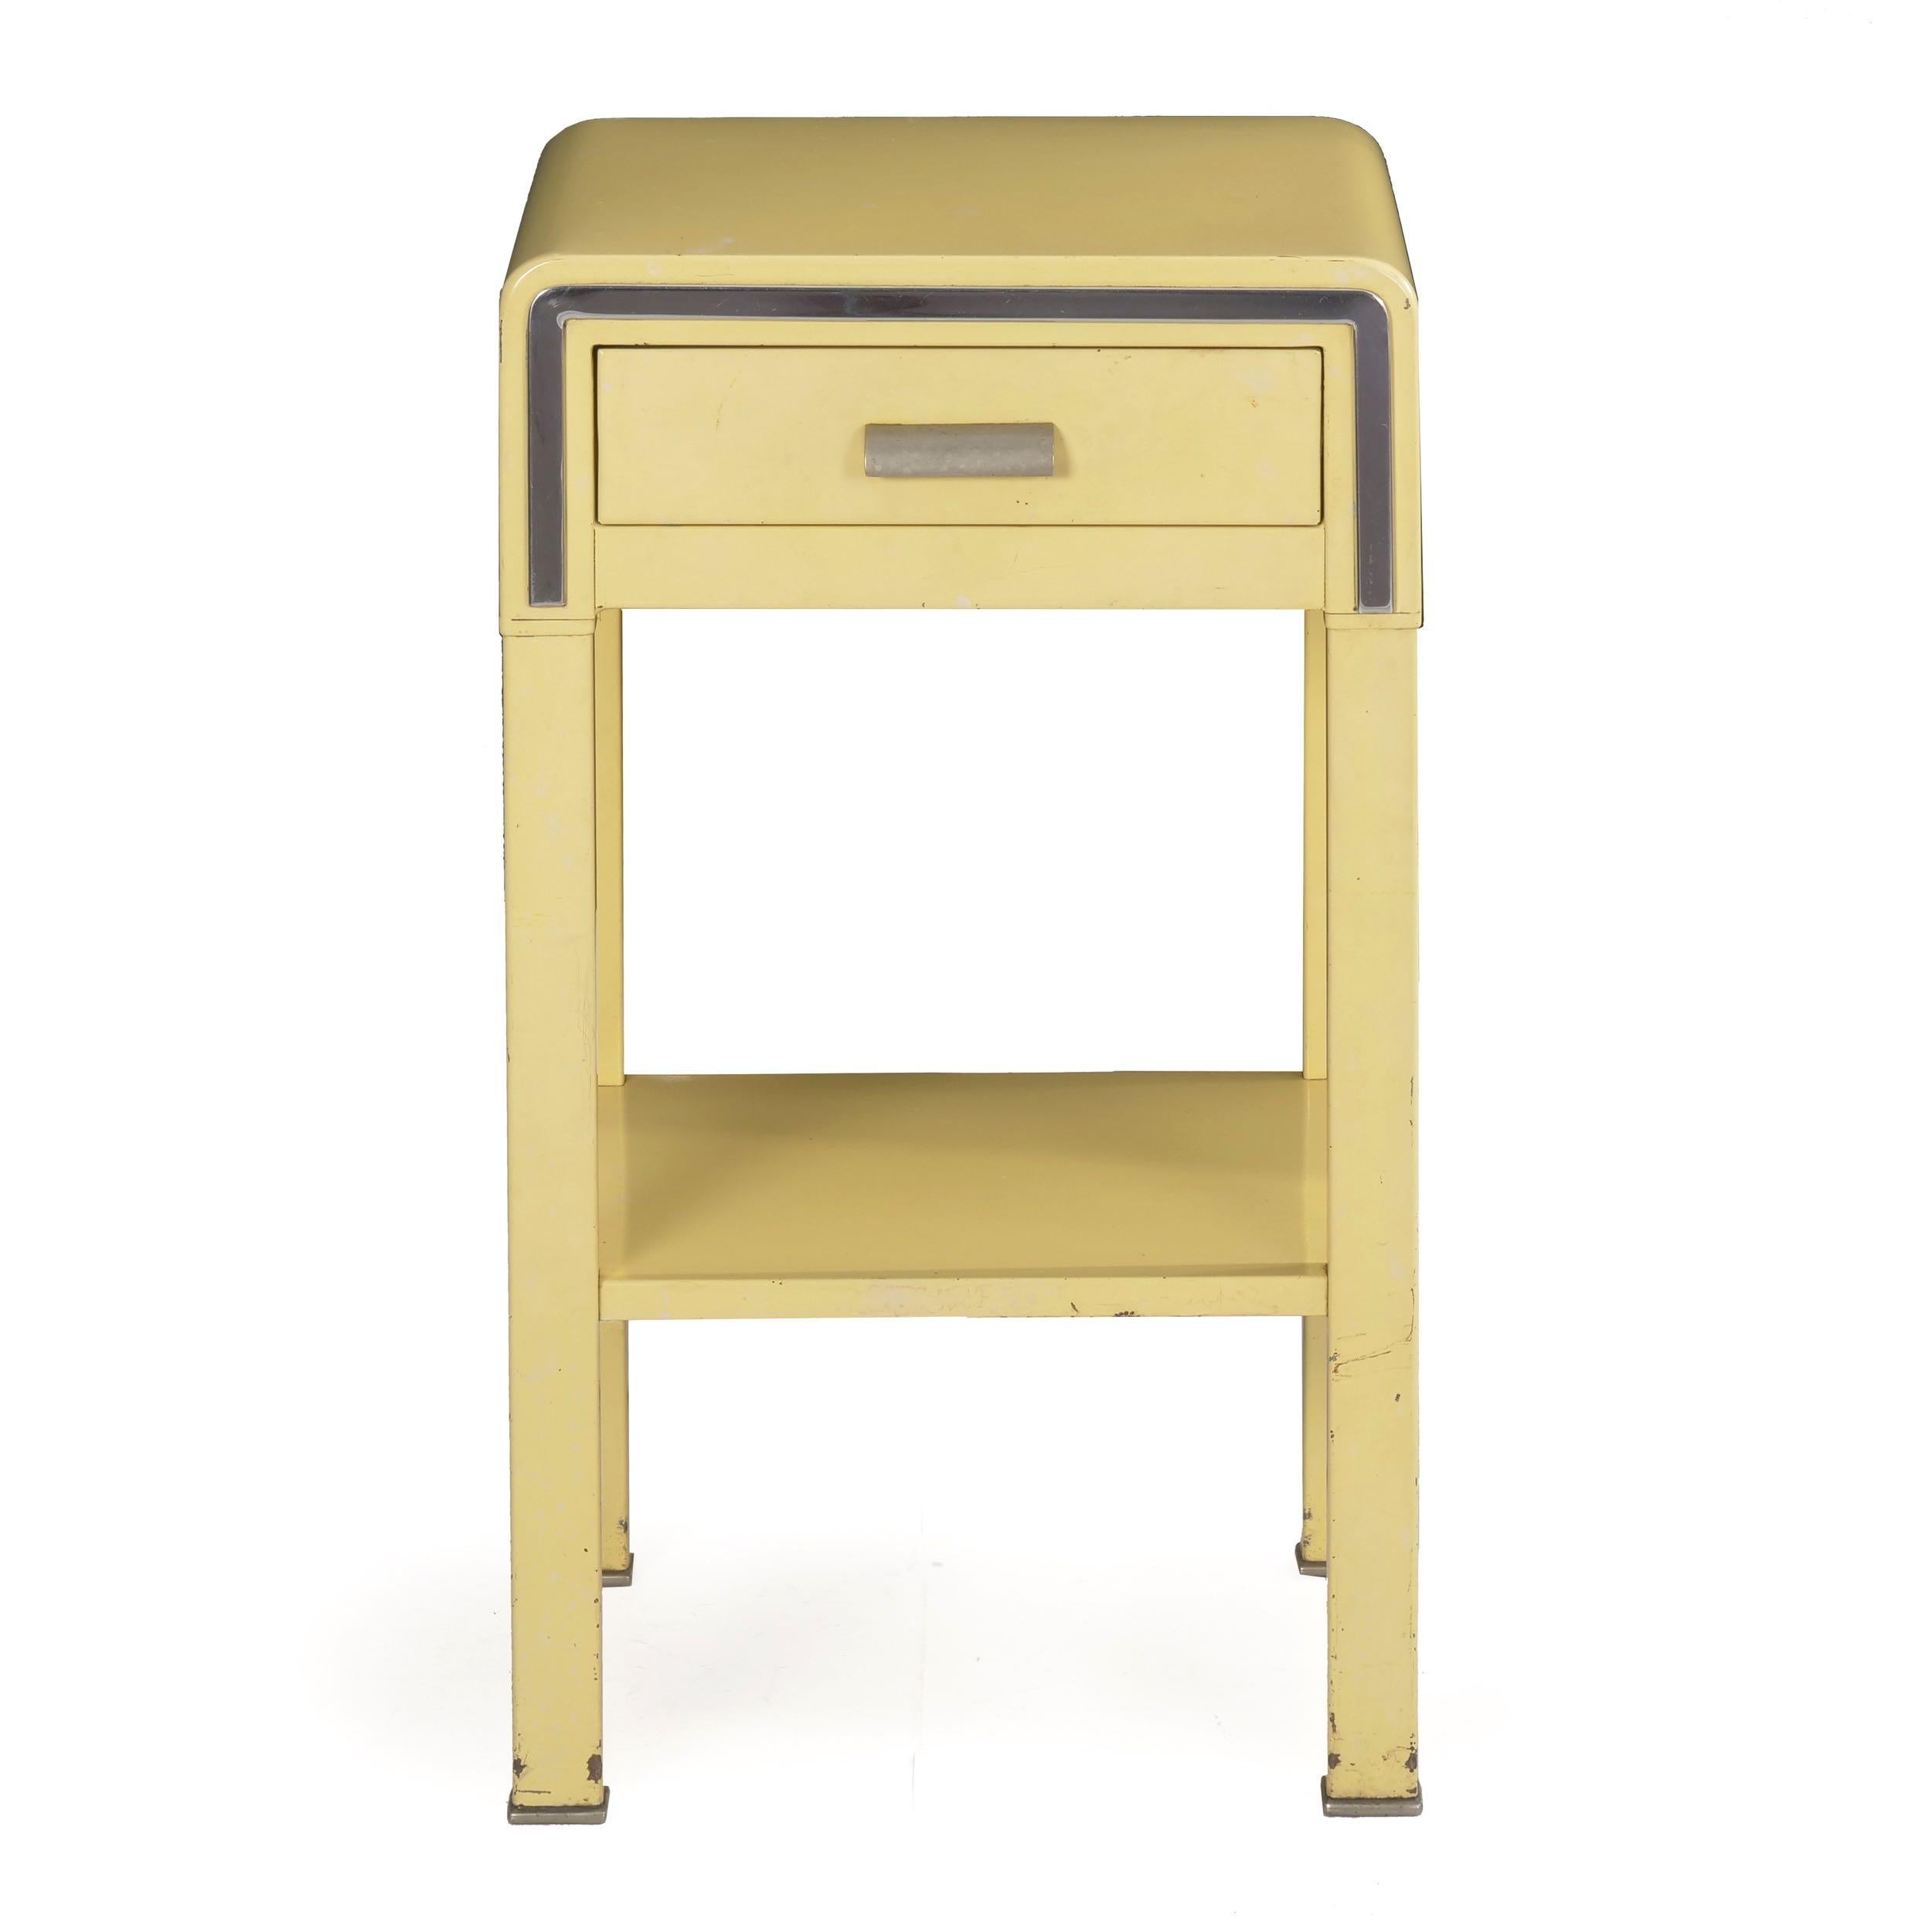 A rare original bedside nightstand table in yellow enameled steel designed by Norman Bel Geddes for Simmons in 1933, the small bedside table is characterized by extreme austerity with a pale yellow finish against chrome accents and a raw metal pull.